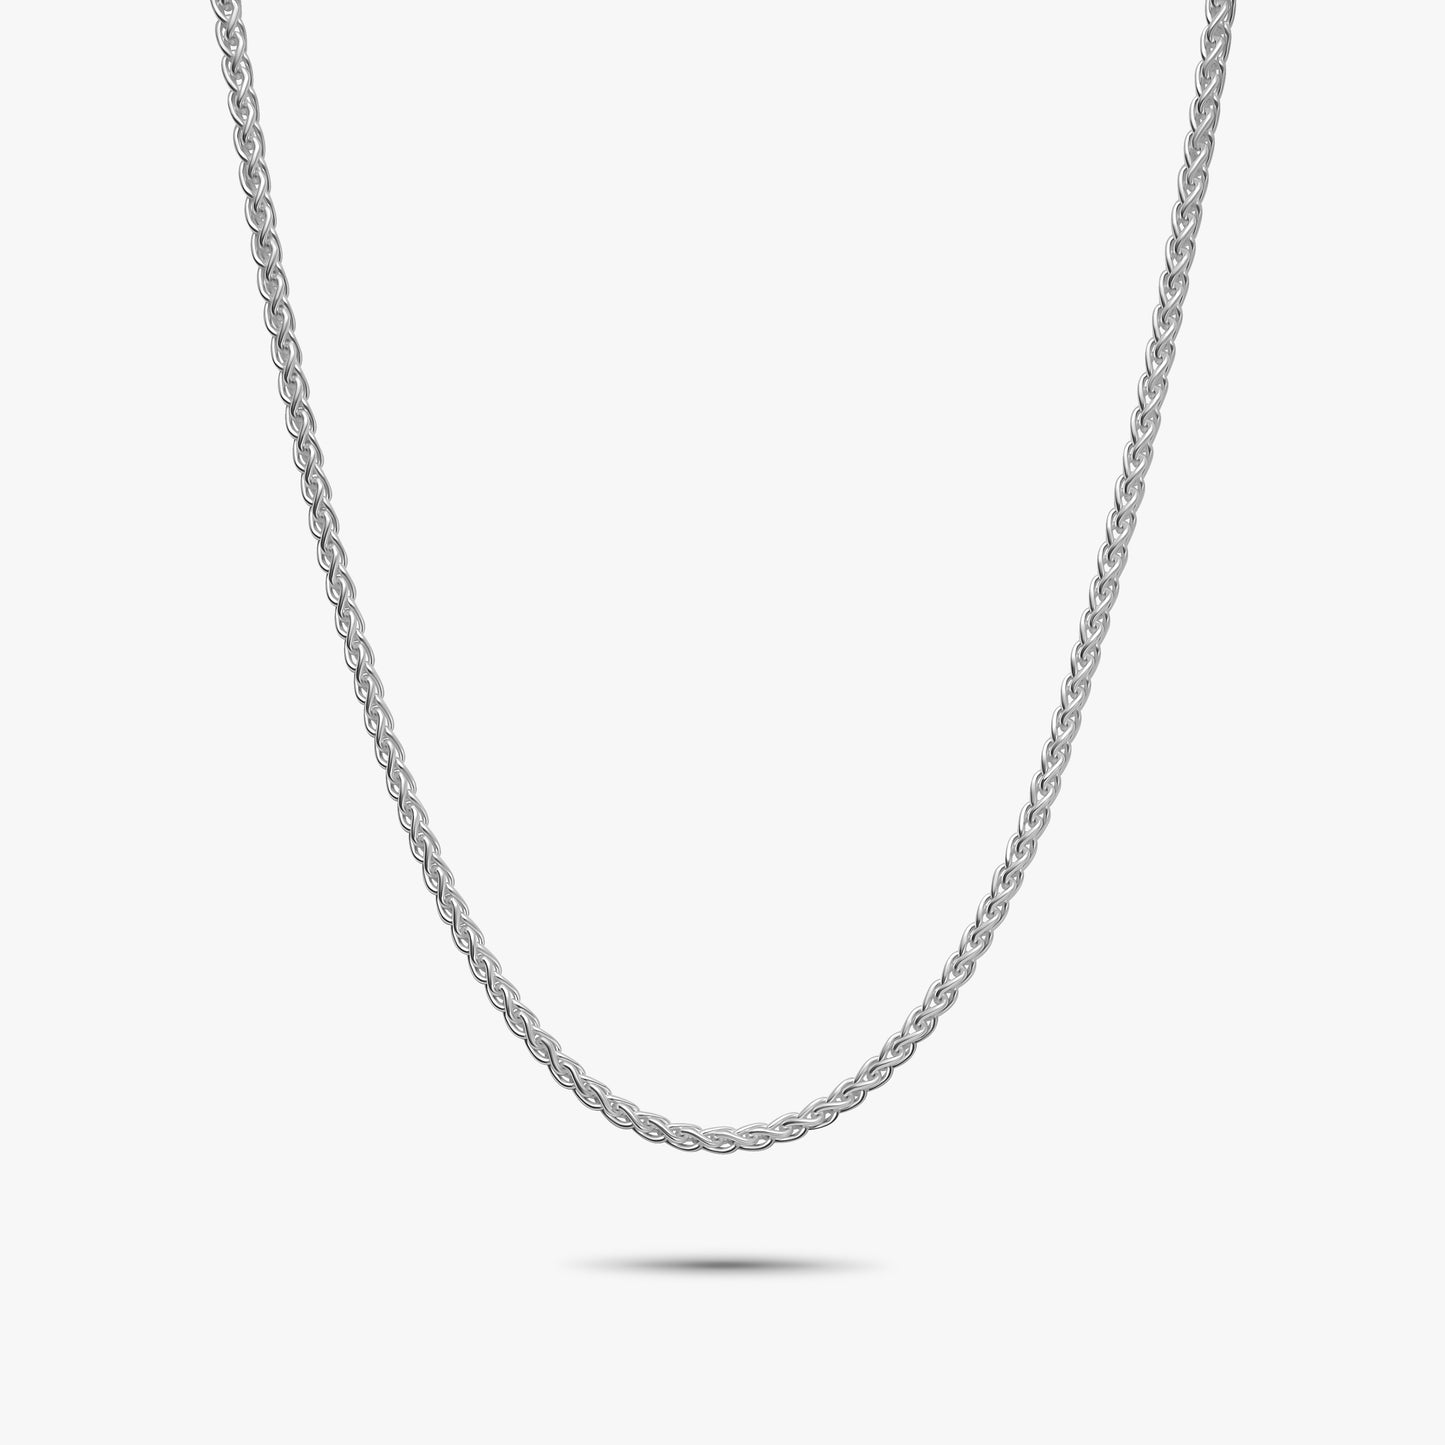 1.9mm sterling silver spiga wheat chain